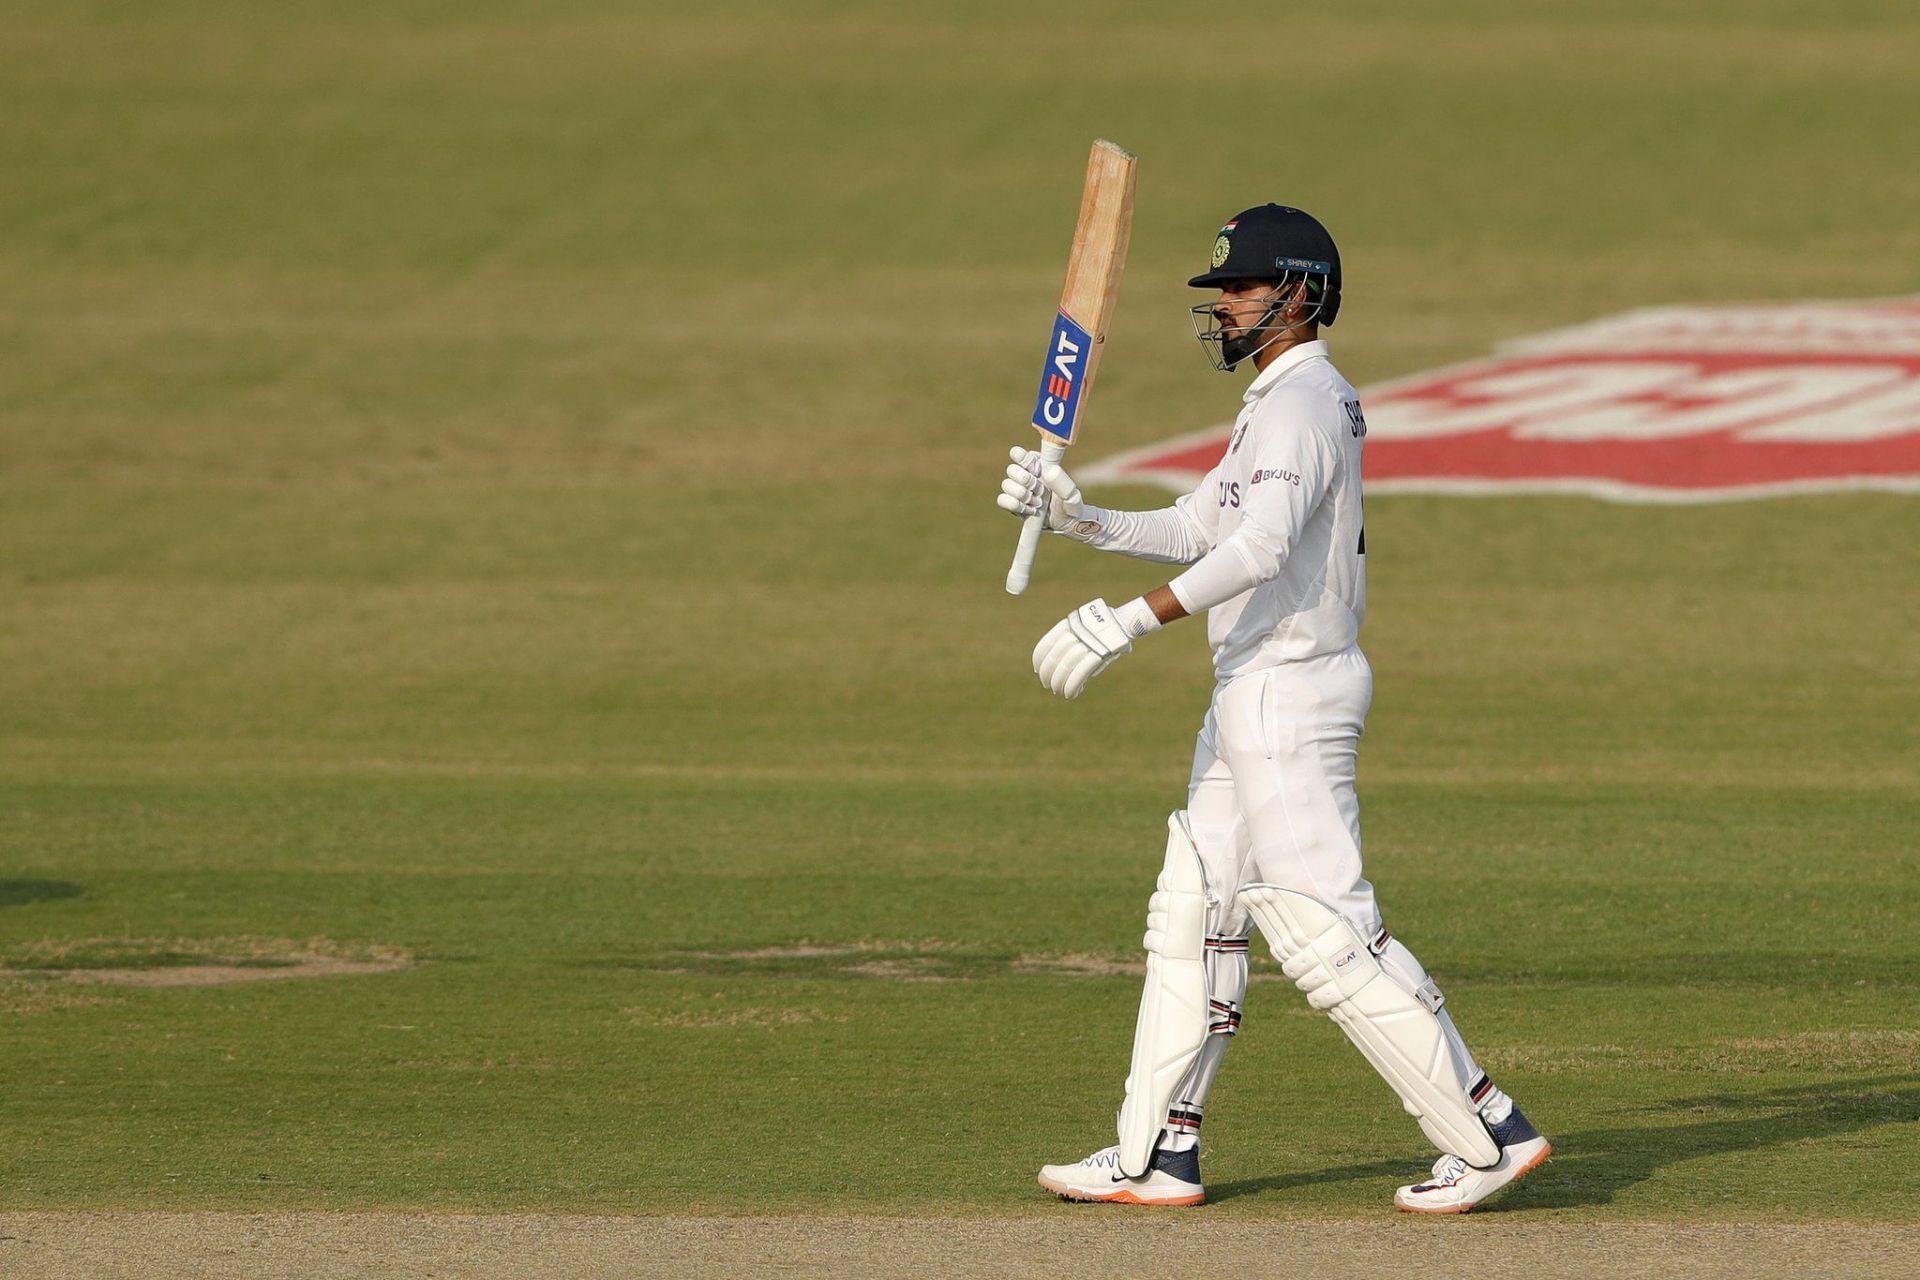 Shreyas Iyer celebrating his first Test century in his debut Test match against New Zealand